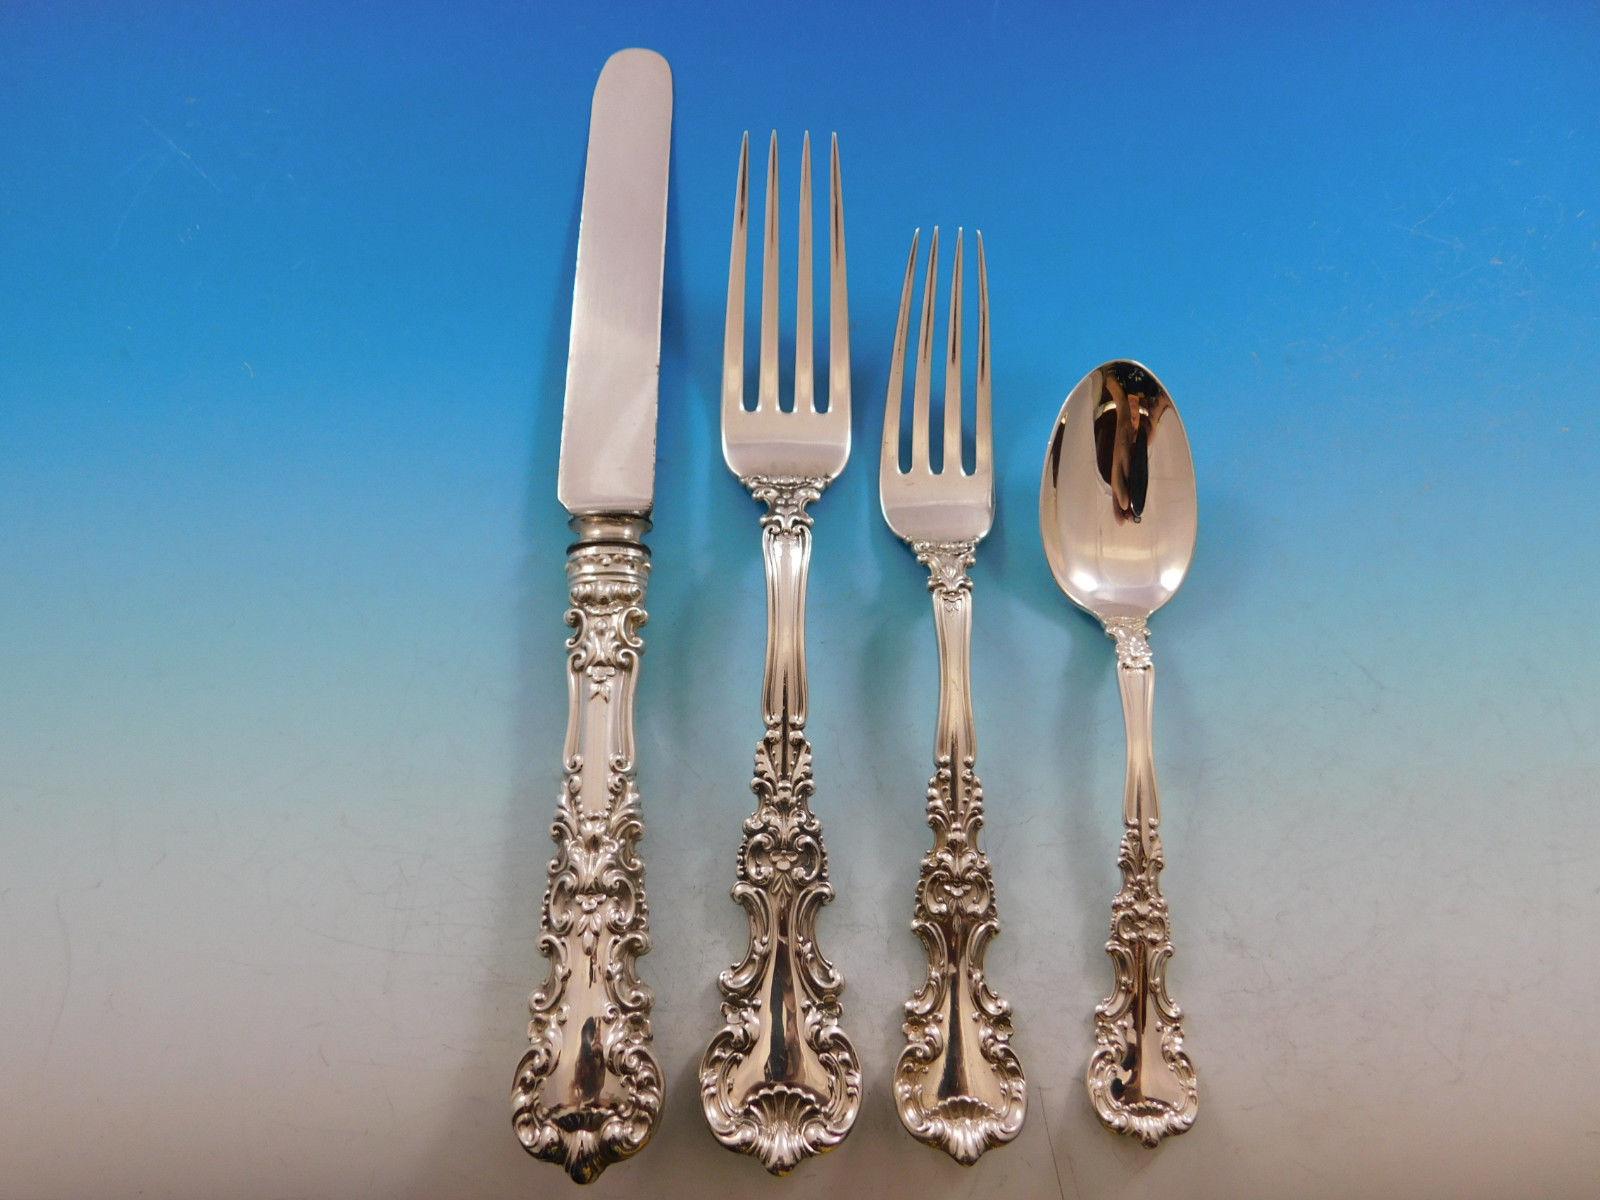 Gorgeous circa 1900 rococo and shell motif Avalon by International sterling silver dinner size flatware set - 84 pieces. This set includes:

12 dinner size knives, with stainless blunt blades, 9 1/2